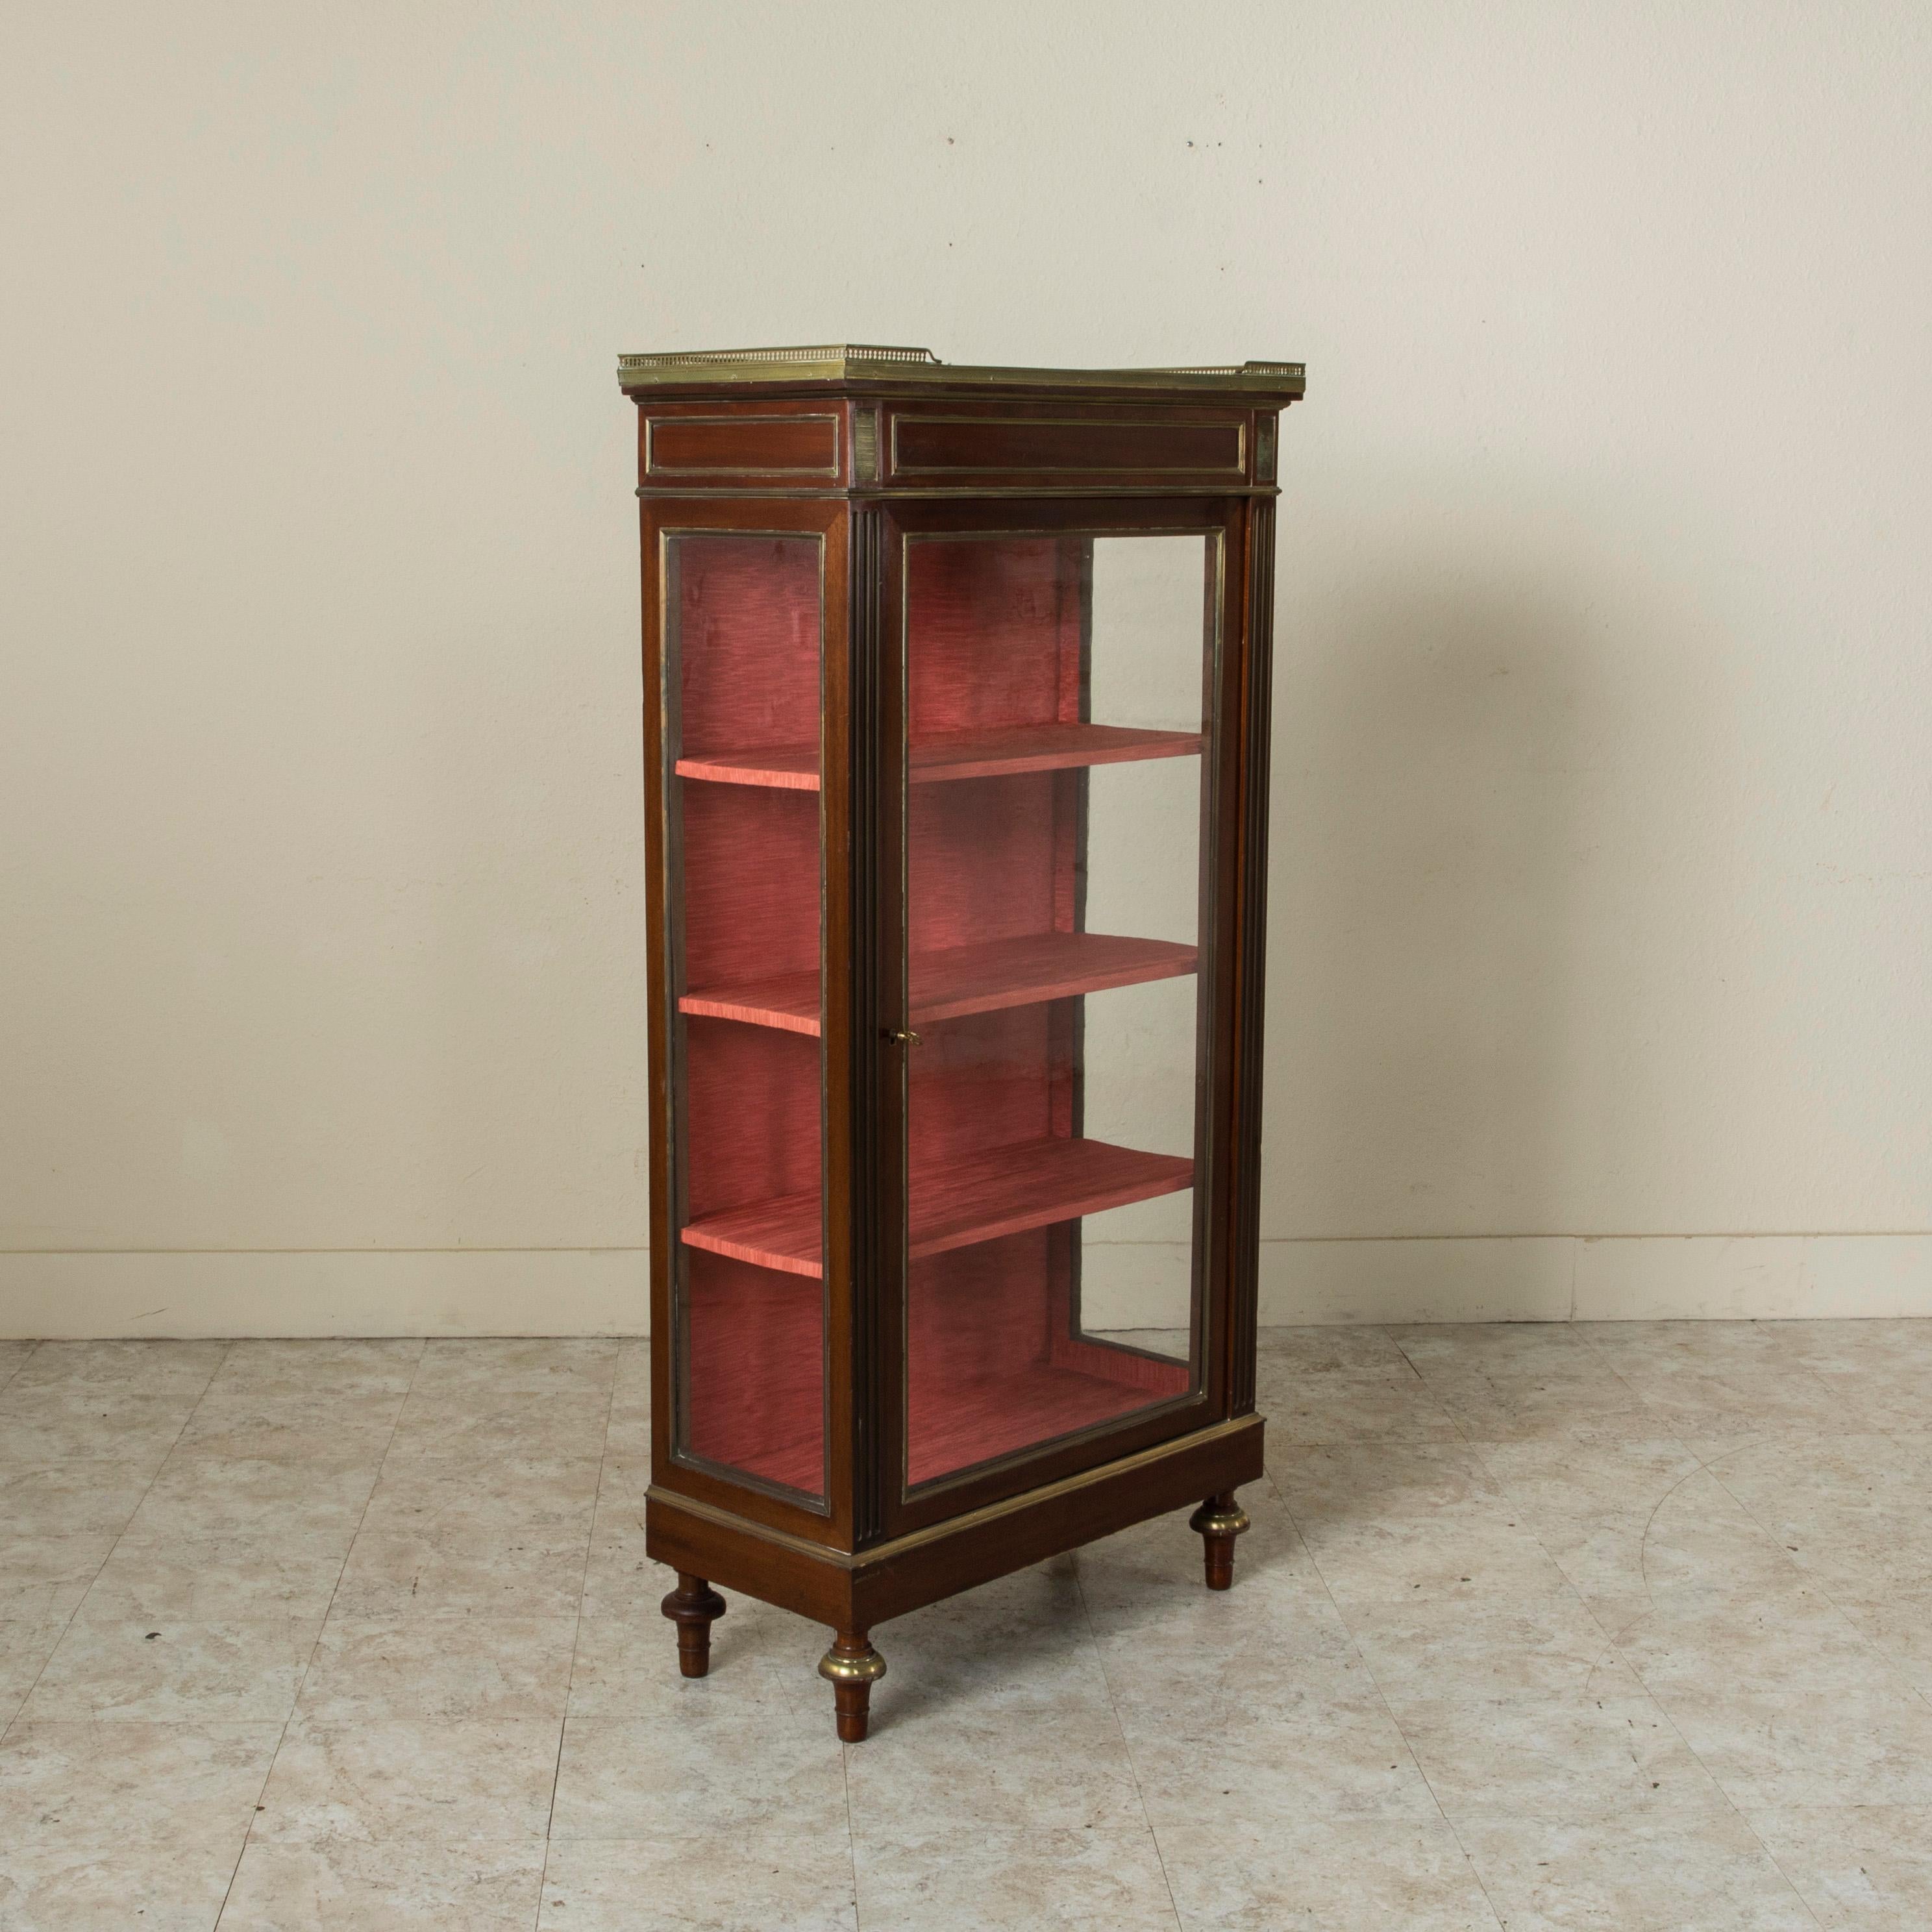 With glass on three sides, this French Louis XVI style mahogany vitrine from the late nineteenth century is ideal for displaying any fine collection. Resting on turned finial feet detailed in bronze, it also features bronze striated plaques, bronze